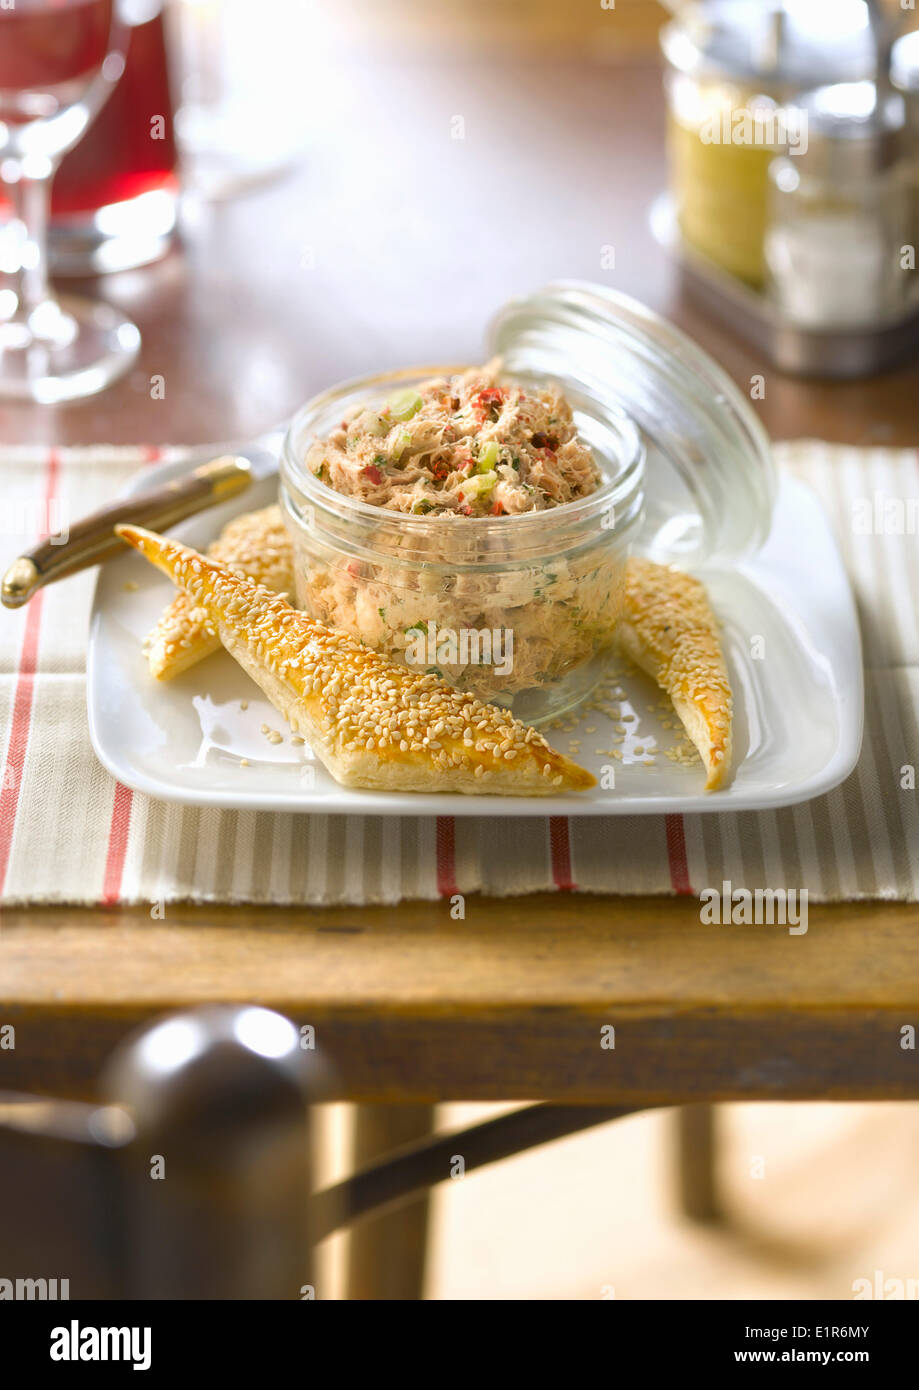 Potted tuna with flaky pastry and sesame triangles Stock Photo